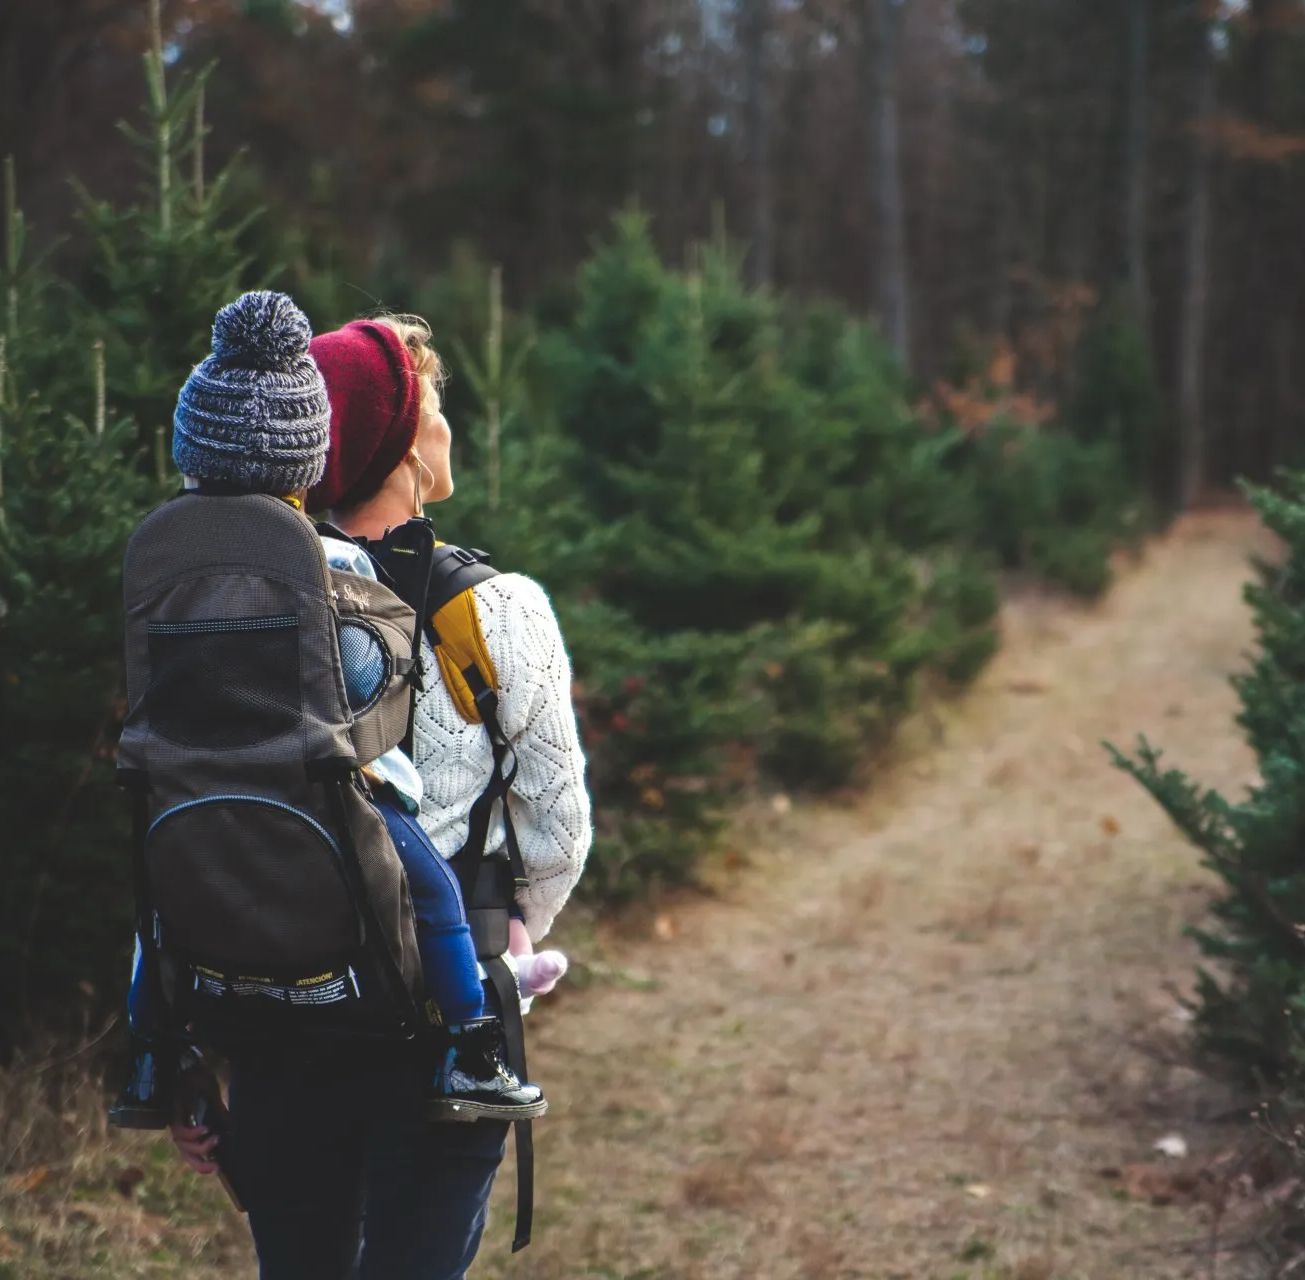 therapy is like being a hiking guide. the image is of a mom with a kid on a trail.